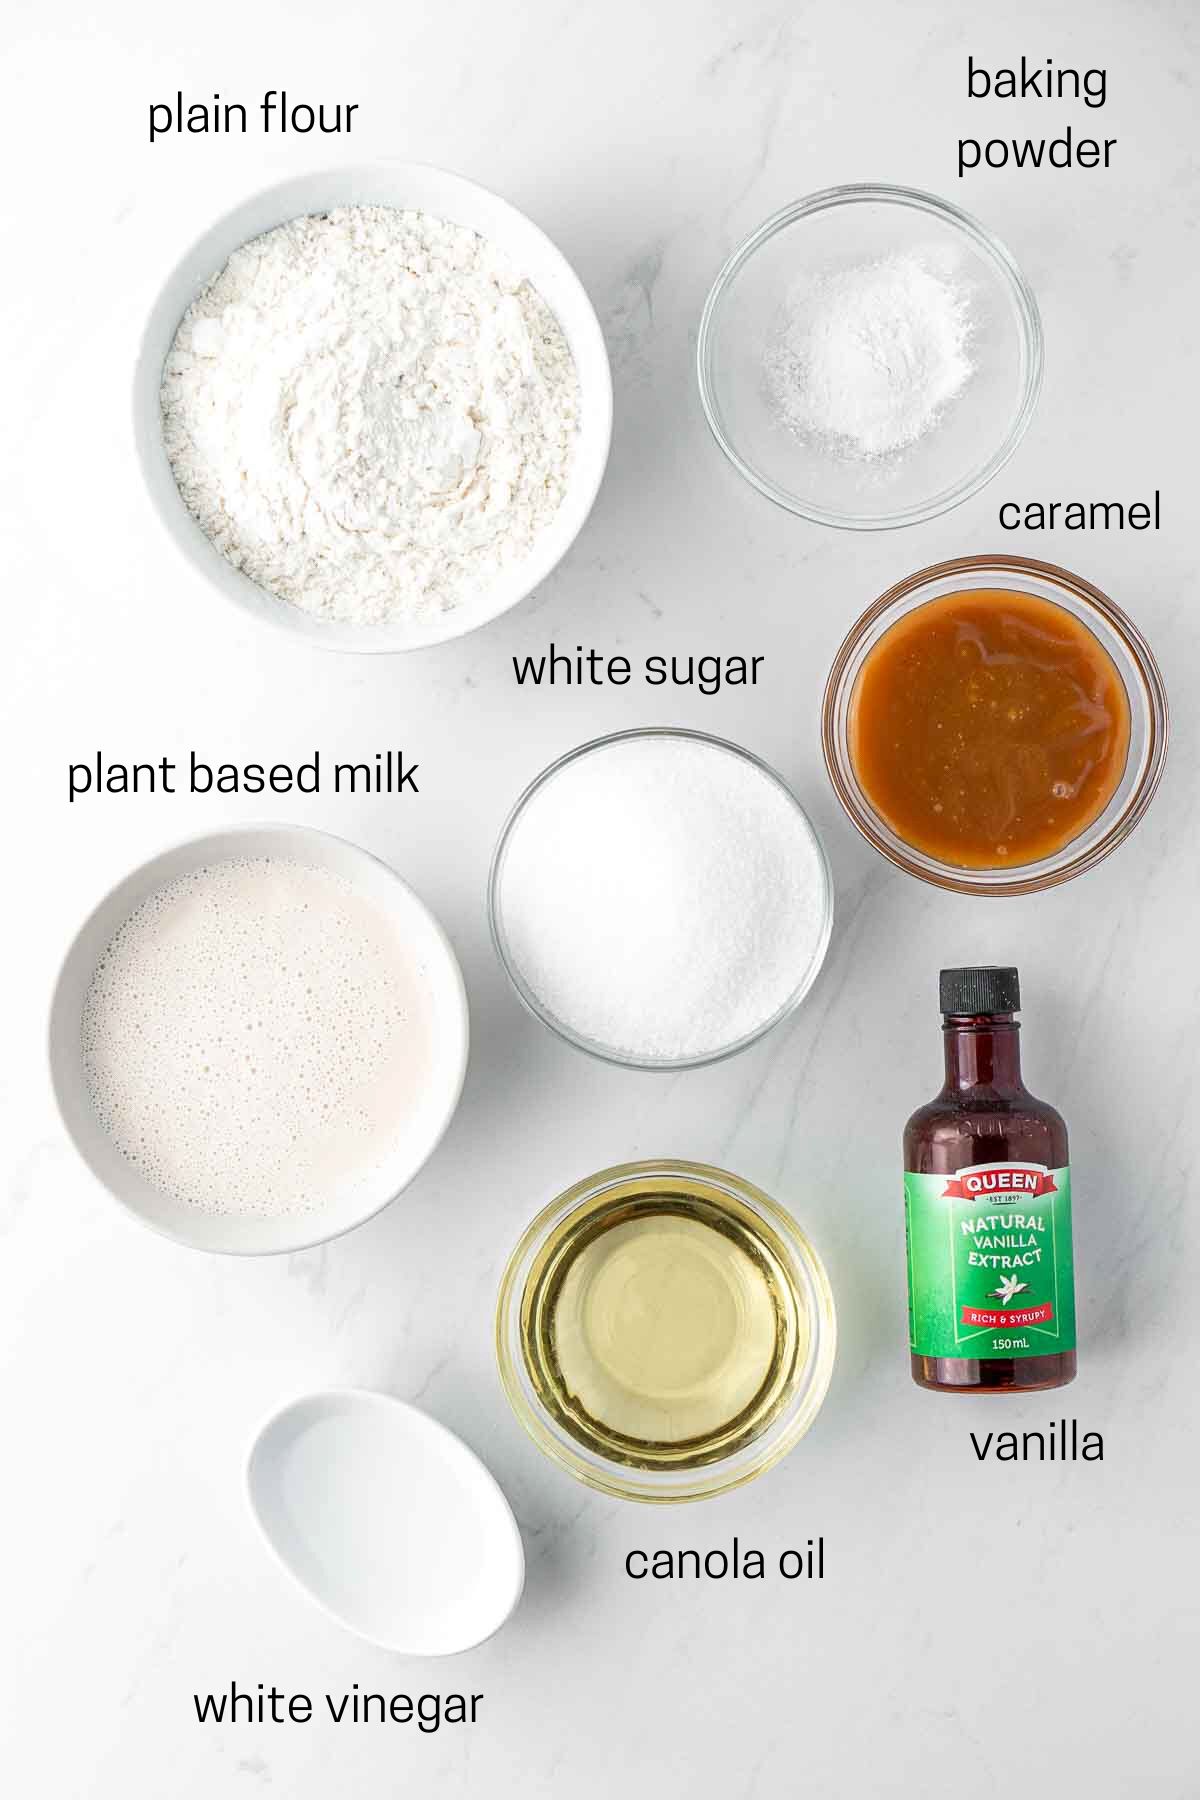 All ingredients needed to make vegan caramel cake laid out in bowls.